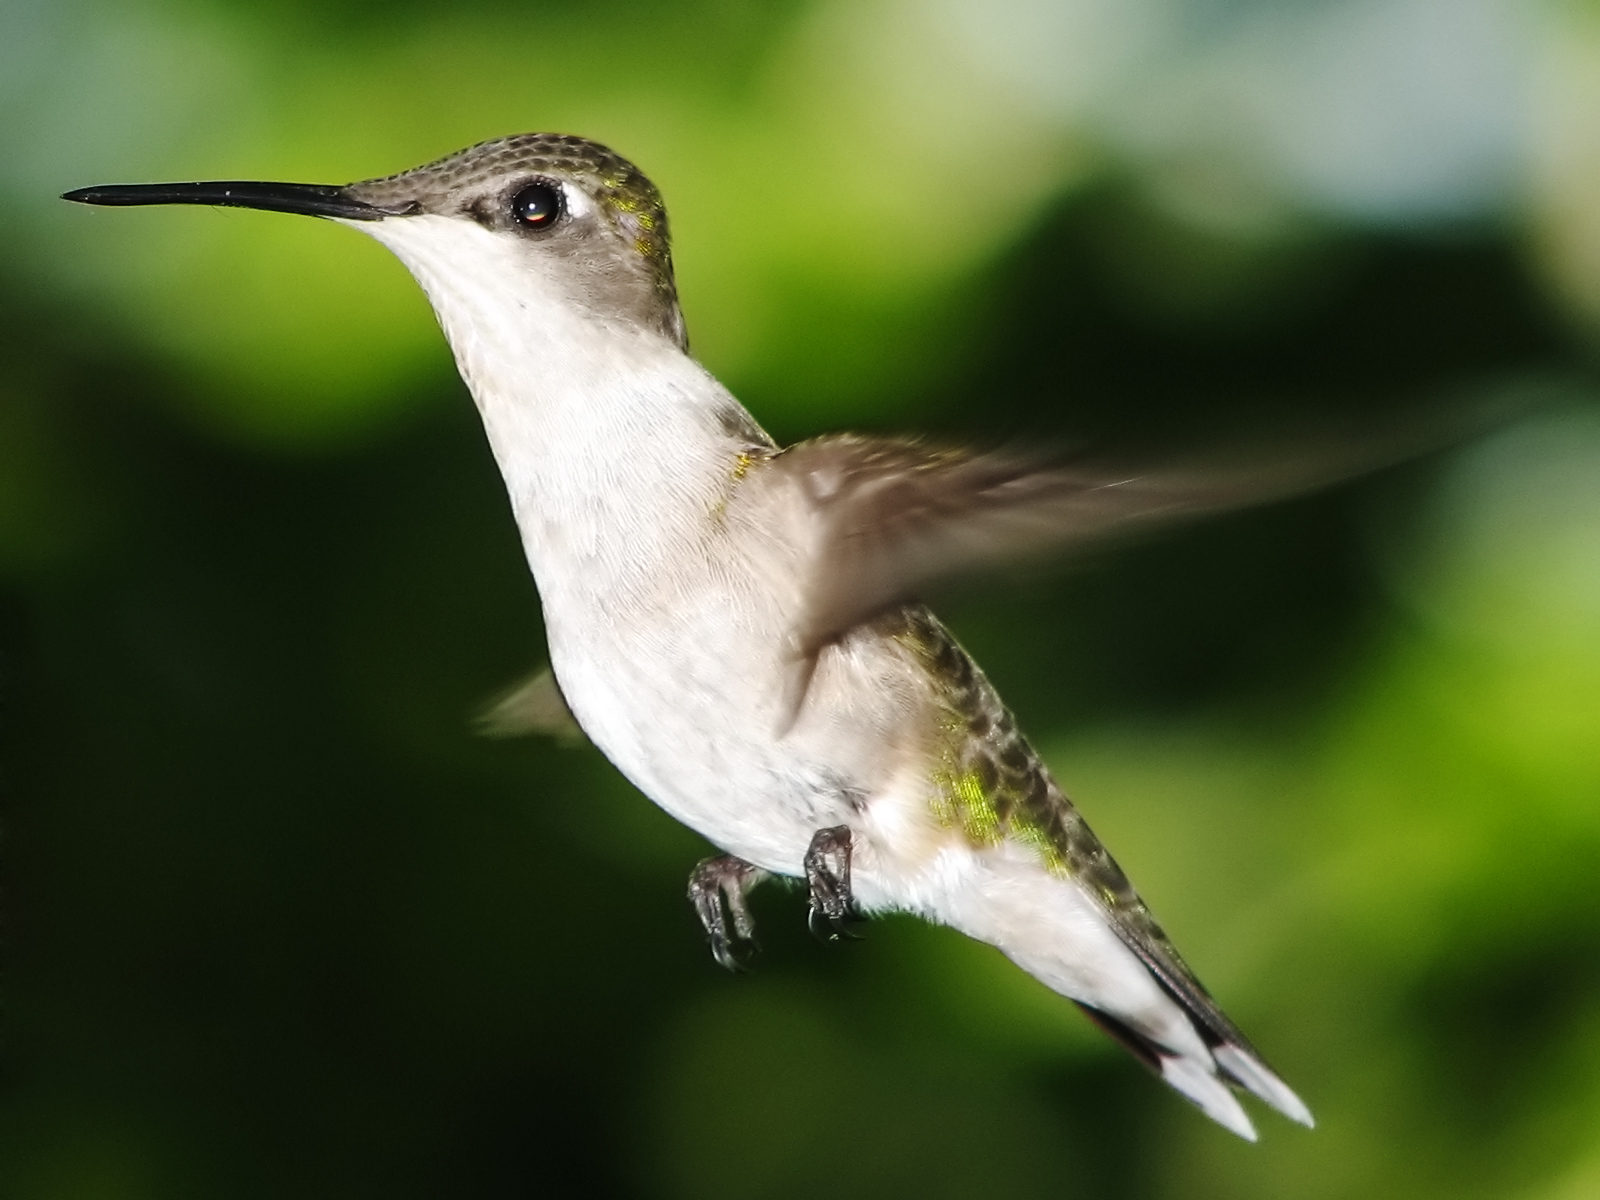 Female hummingbird, photographed by Keith Johnston (Free Images)